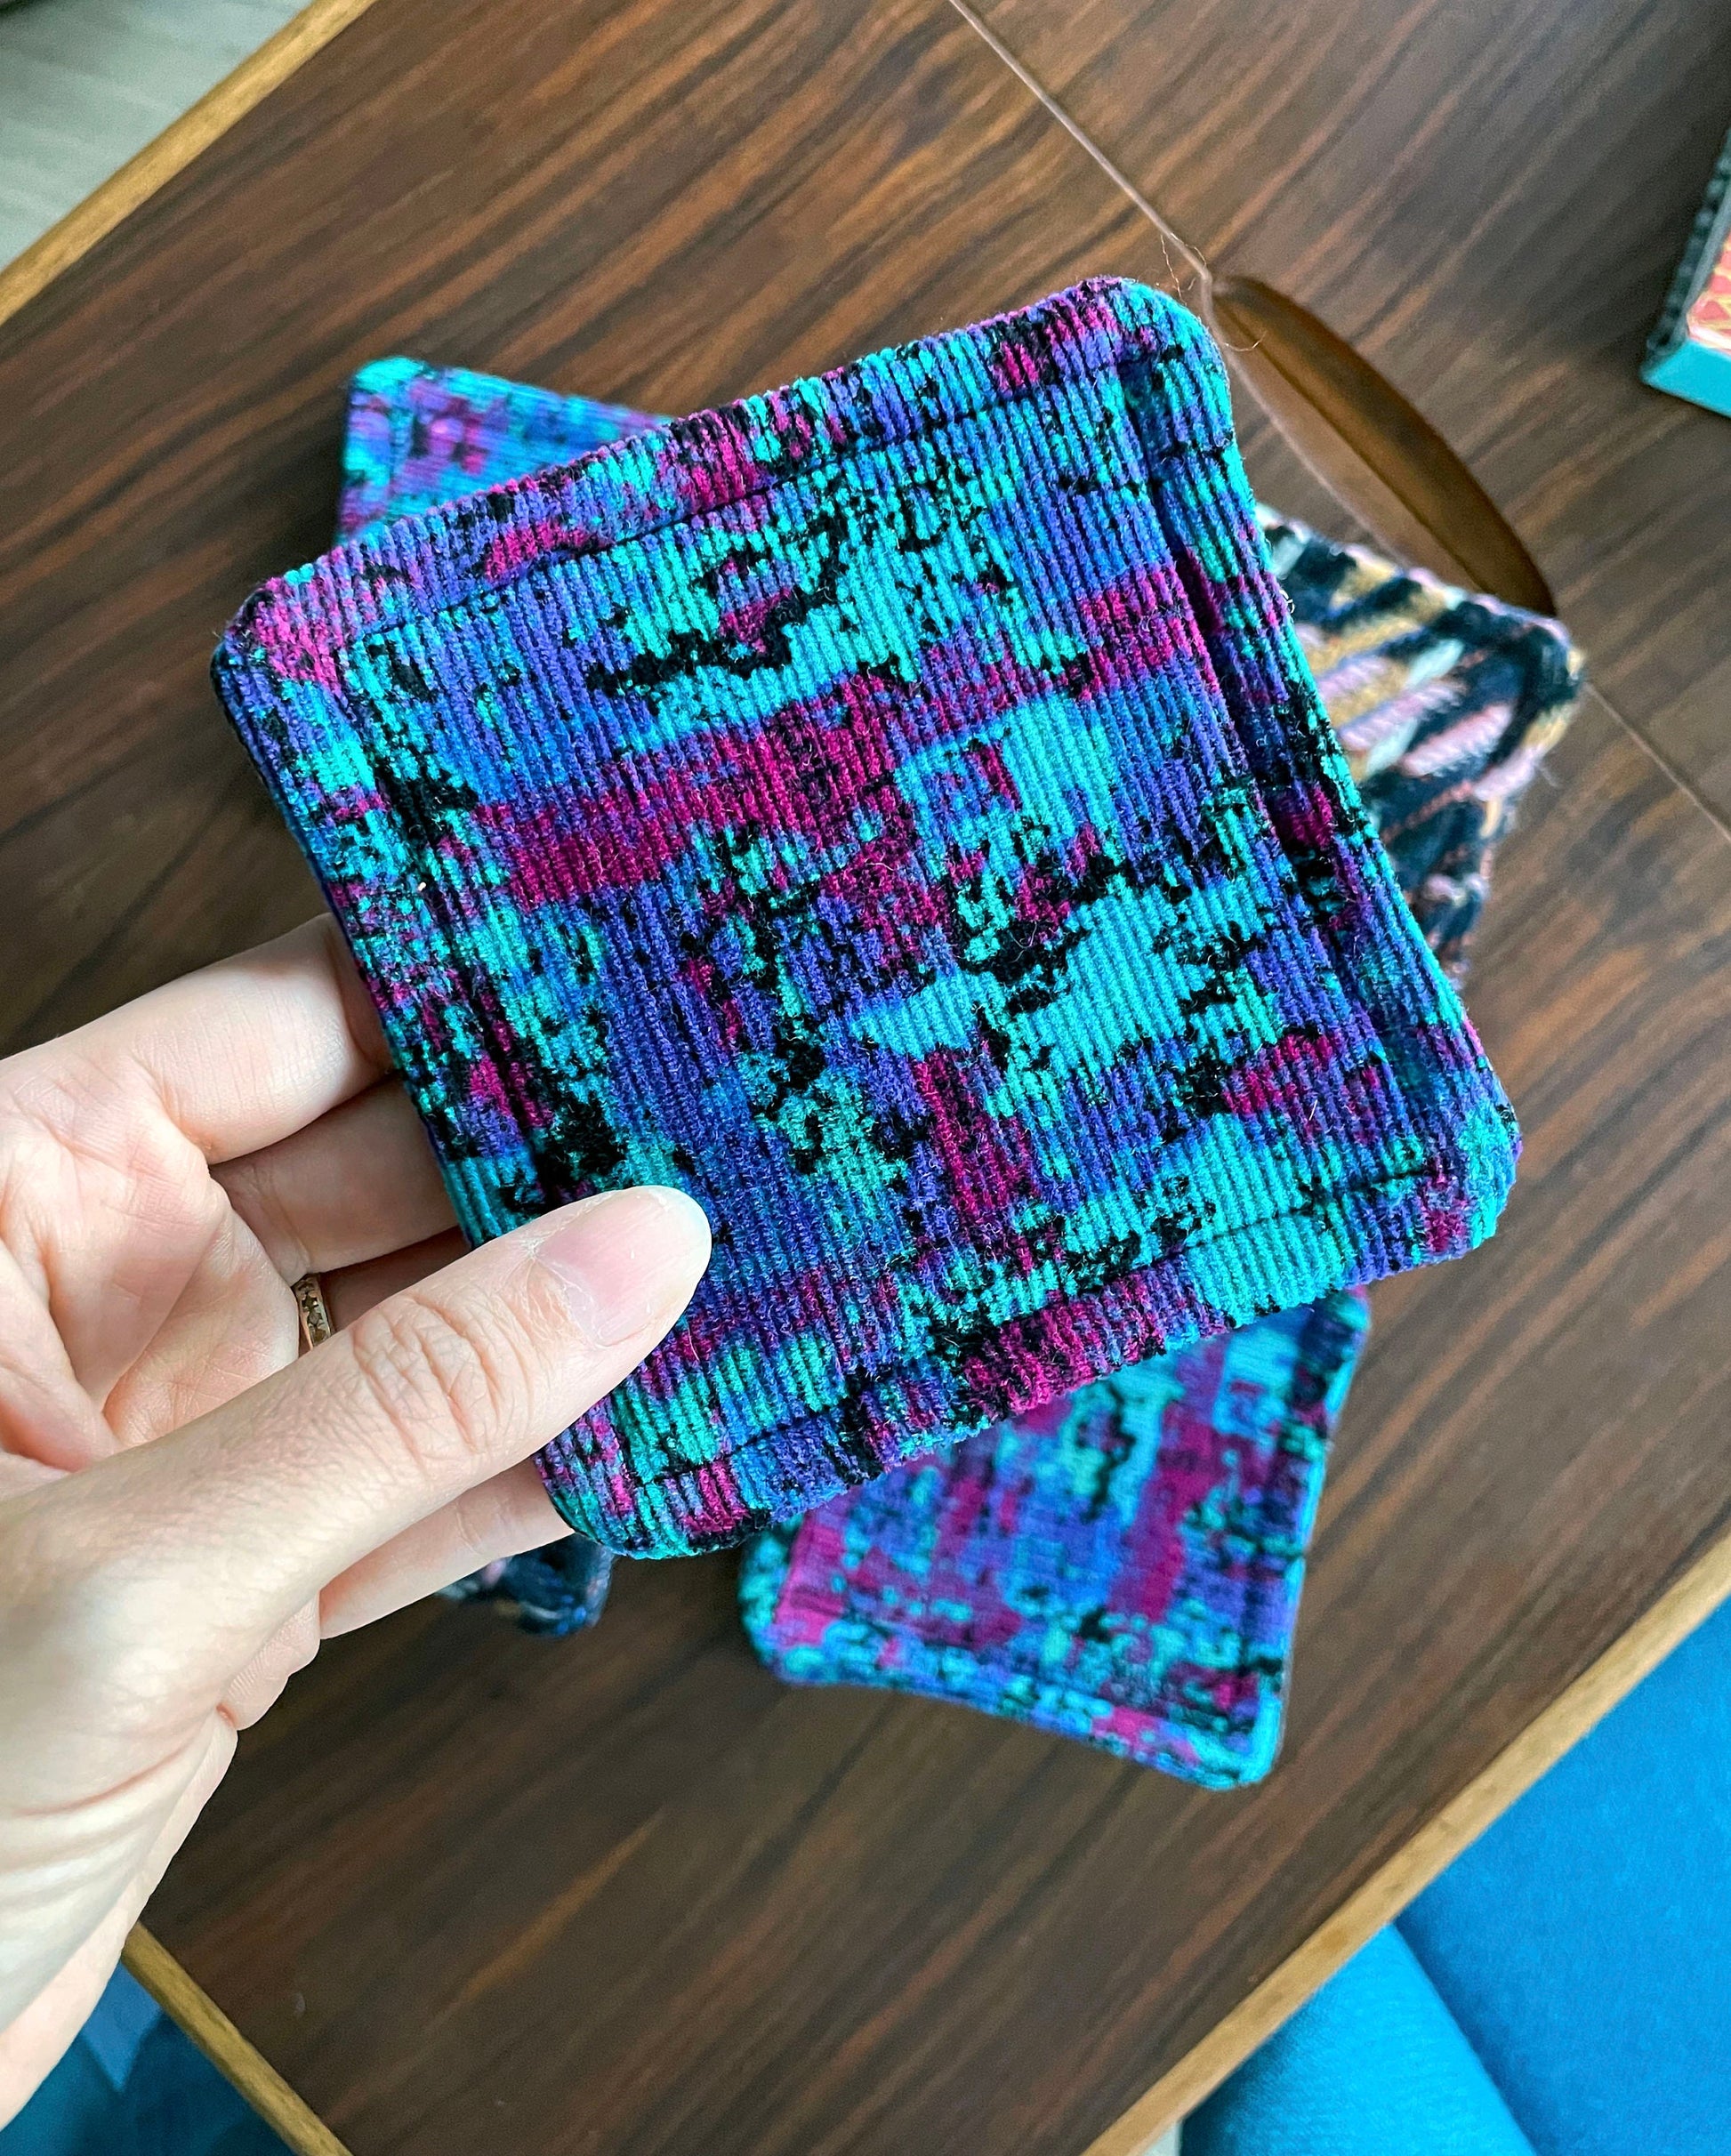 Abstract Print Fabric Coasters - Recycled Cotton Corduroy and Denim